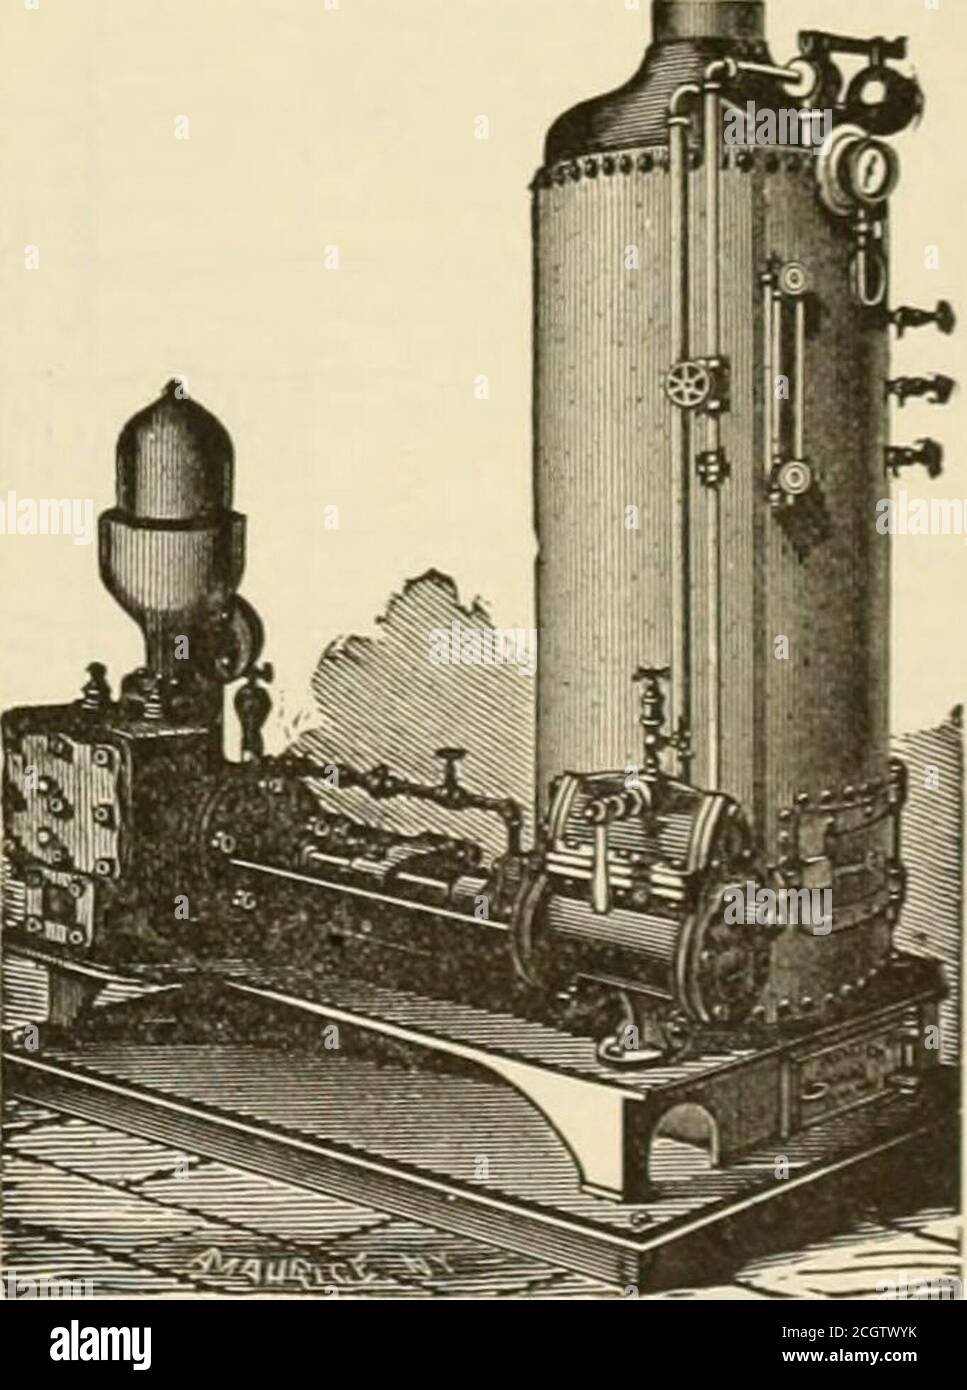 . Locomotive engineering : a practical journal of railway motive power and rolling stock . A, Chipman, Treat. OOXJIiDS team and Water Packing The Original Ring Packing. In ordering give k a.t diameter of Stuffing Box and Valve Stem. None genuine without this Trade Mark. THE GOULD PACKING CO., EAST CAMBRIDGE, MASS OCTAVIUS KNIGHT, Patent Expert, 37 LIBERTY ST., NEW YORK. Fortv Years Experience. Litigated Cases; Applications; Investigations. Telephone 4106 Cortlandt. LATROBE STEEL CO., 1 MANLFACTLRER5 R OF E S FOR LOCOMOTIVEand CAR WHEELS. WORKS. LATROBE, PENNA. Automatic Steel Couplers, Ellipt Stock Photo